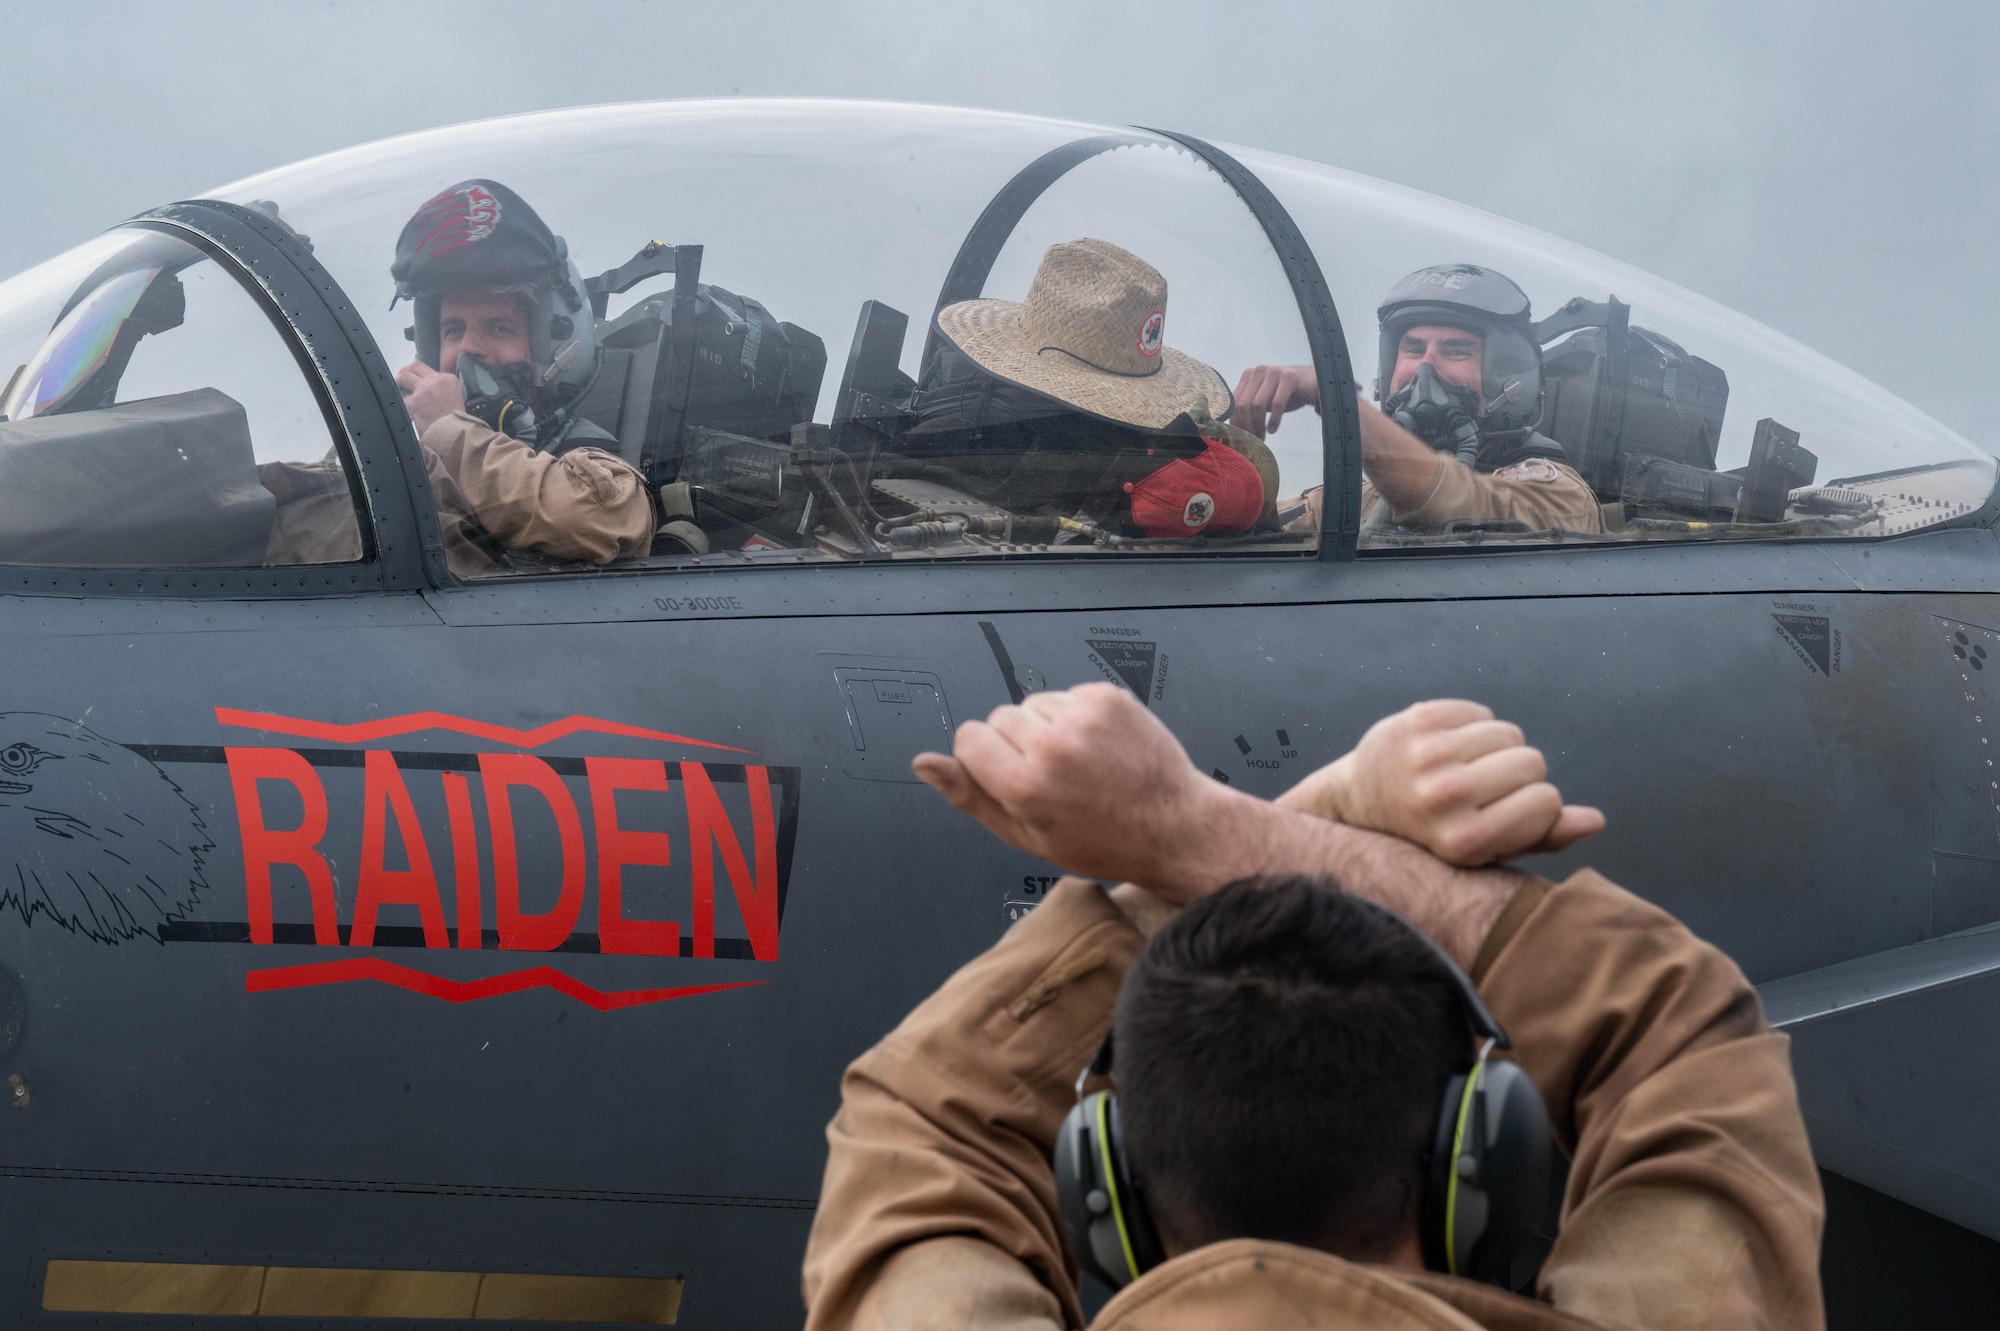 U.S. Air Force aircrew assigned to the 494th Fighter Squadron prepare to exit an F-15E Strike Eagle at Royal Air Force Lakenheath, England, Oct. 26, 2021. Deployed as the 494th Expeditionary Fighter Squadron at the332nd Expeditionary Wing, the Panthers generated over 1,900 sorties and over 8,400 hours of combat operations while in theater. (U.S. Air Force photo by Airman 1st Class Jacob Wood)